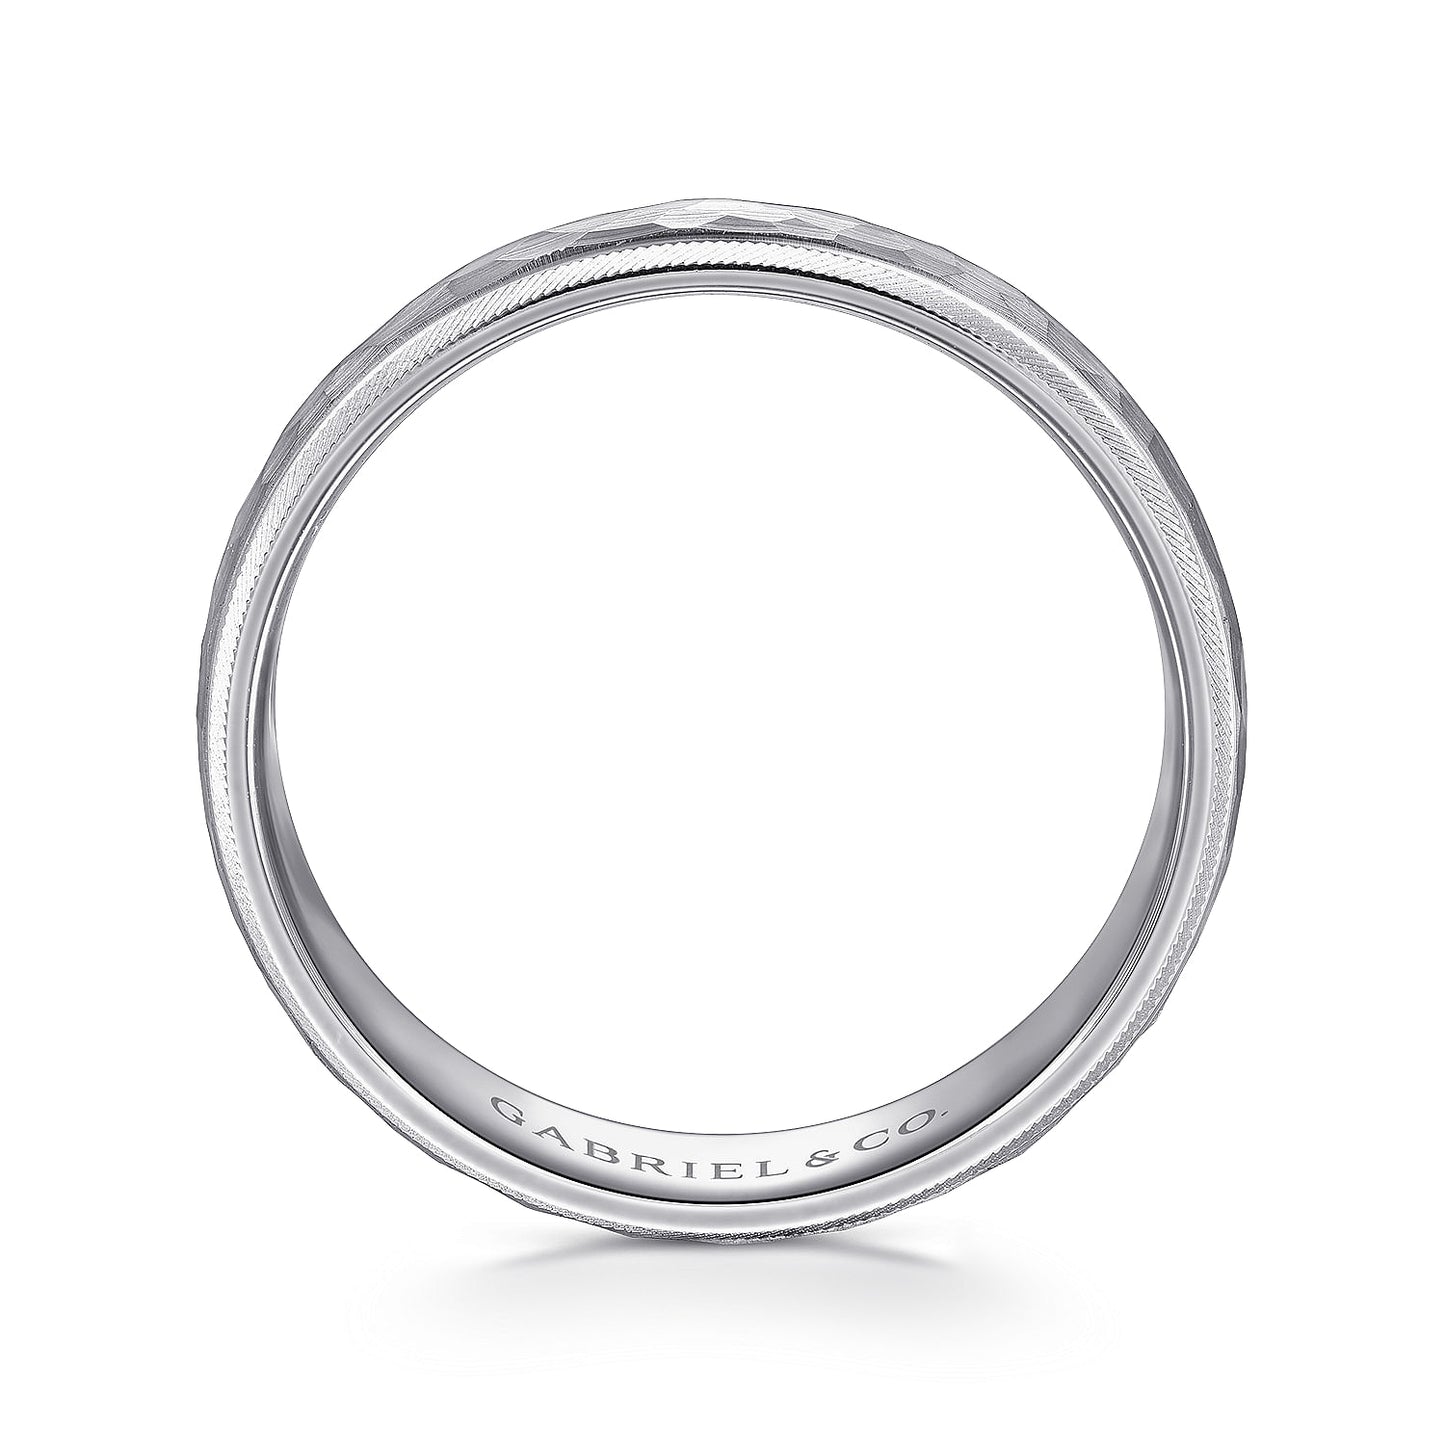 Gabriel & Co White Gold Wedding Band With A Hammered Finished Center And A Diamond Cut Edge - Gold Wedding Bands - Men's